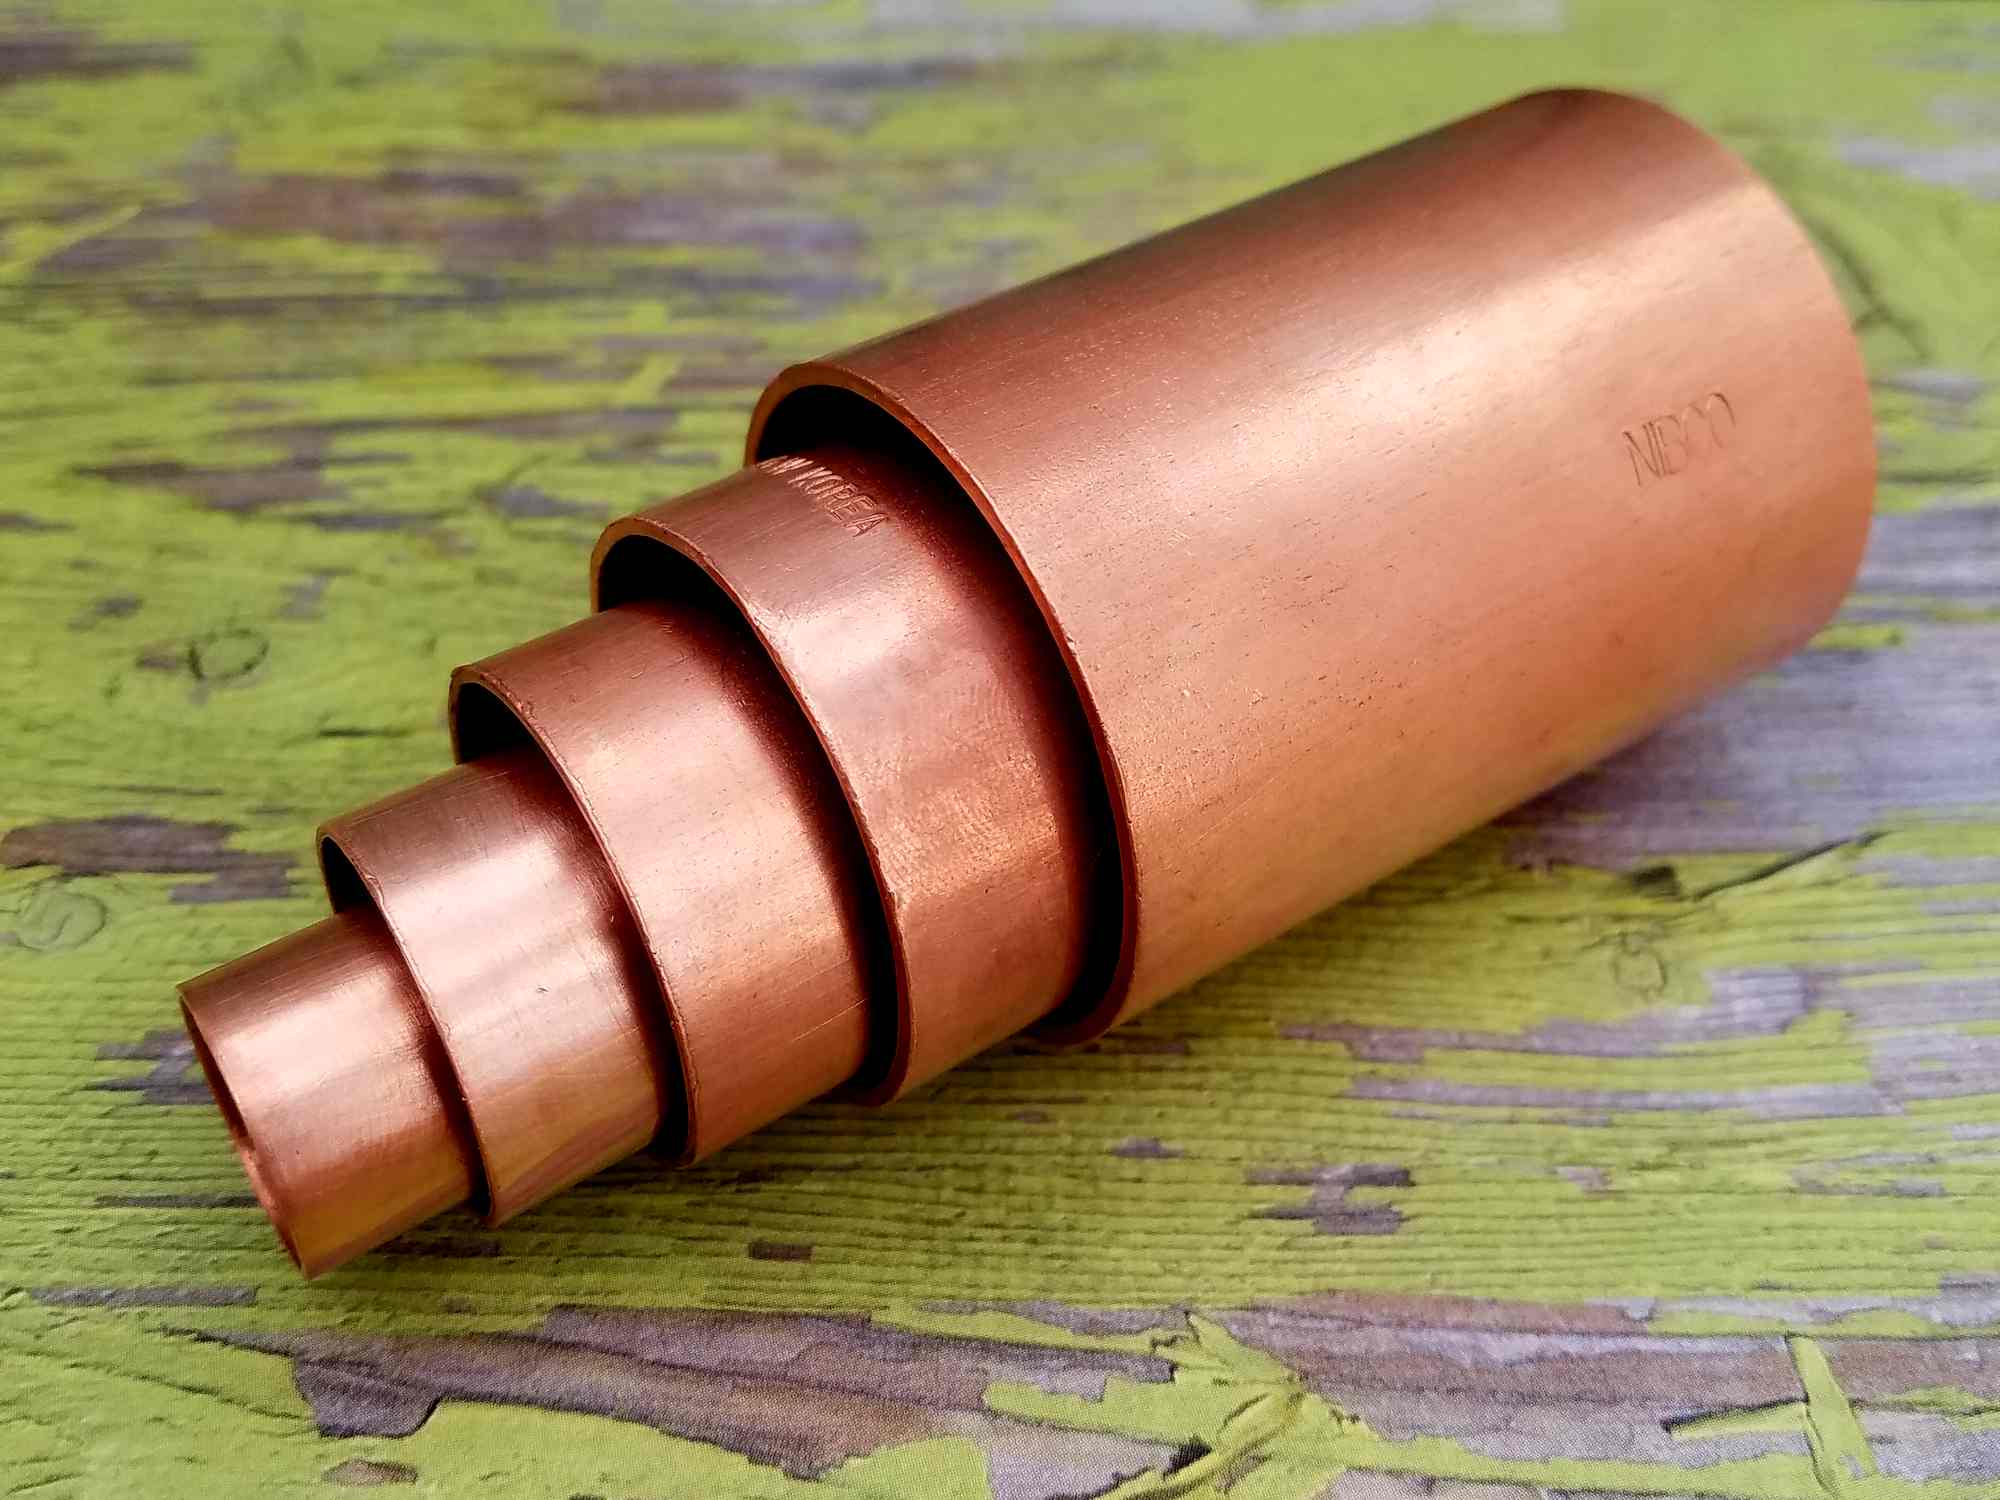 Copper union fittings, like those shown here, make great jewelry mandrels!